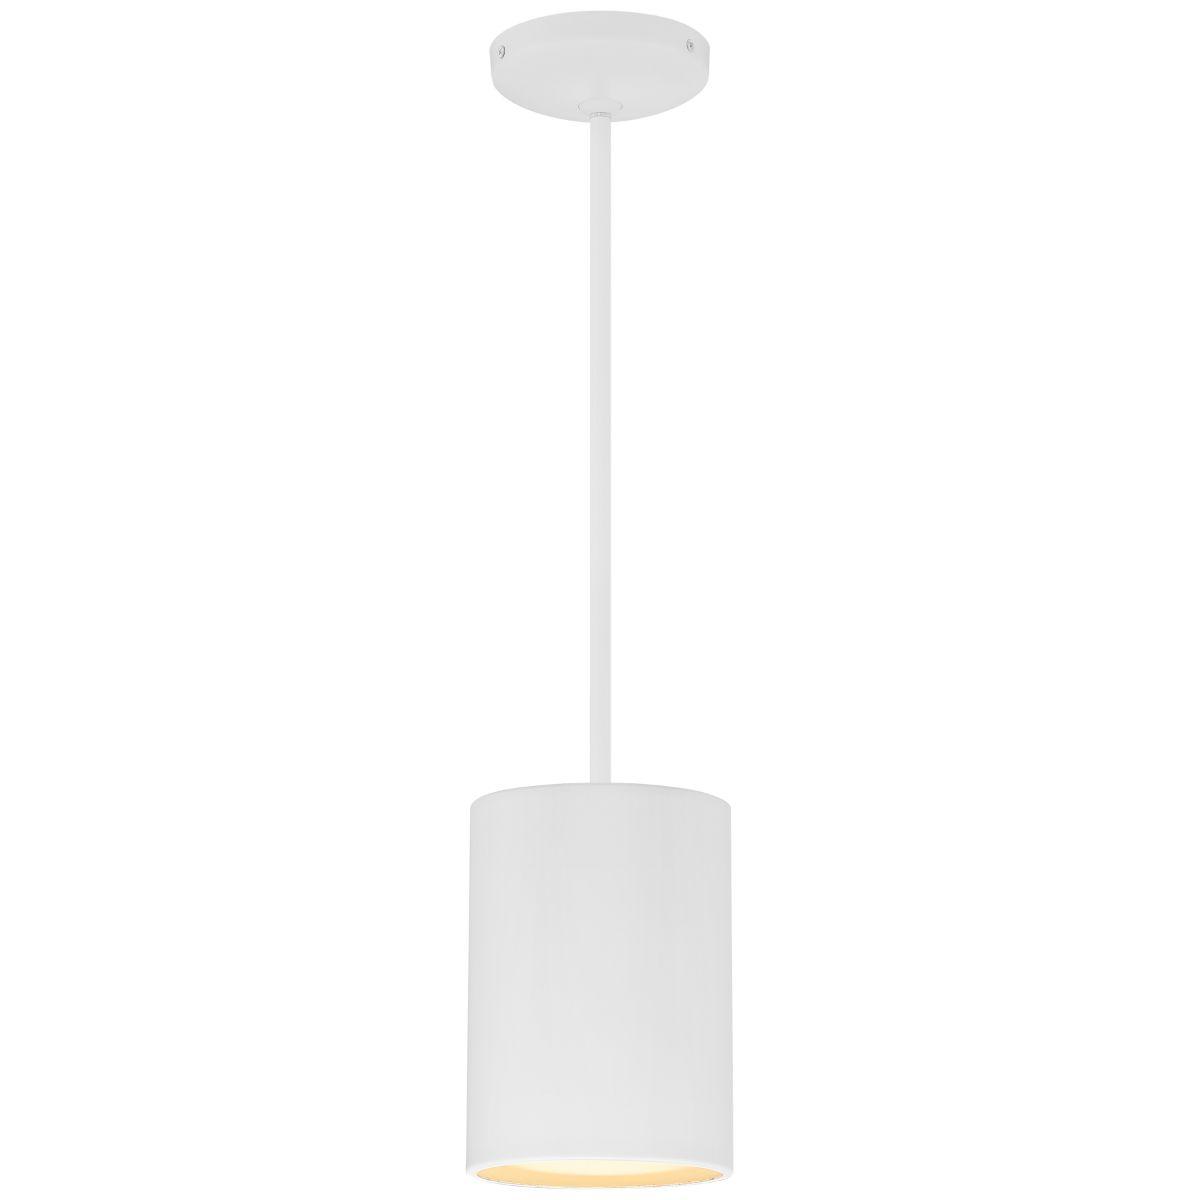 Pilson XL 7 in. Pendant Light with Rod - Bees Lighting